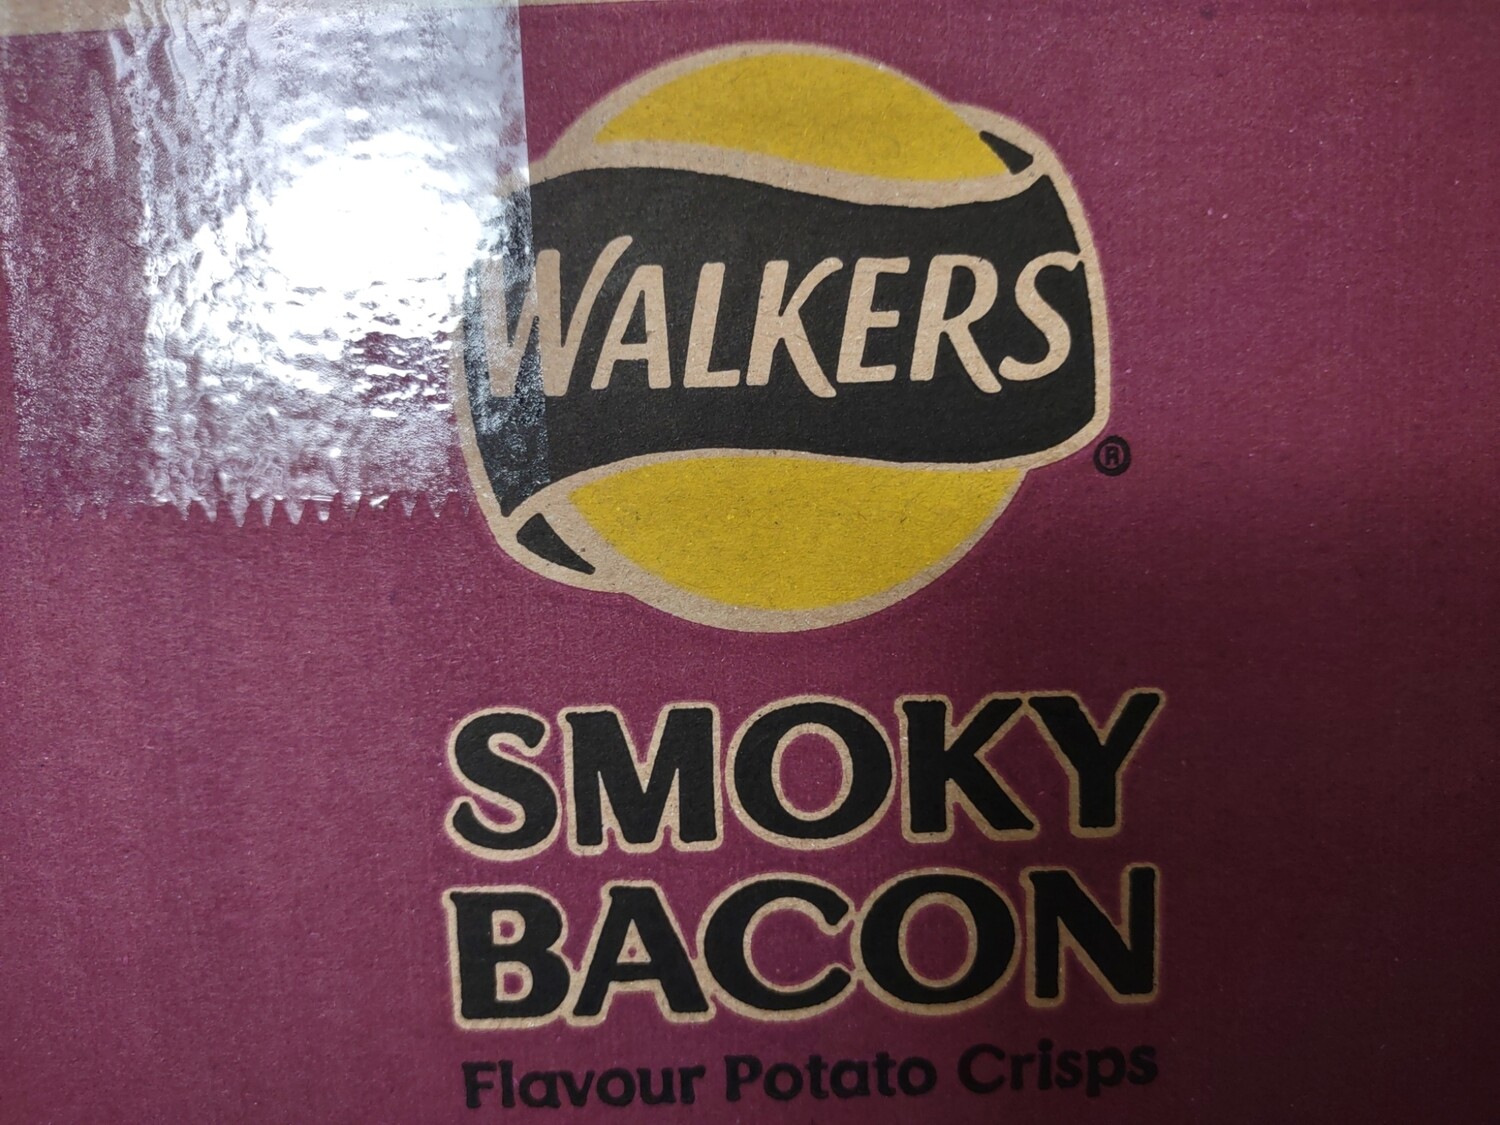 Walkers Smoky Bacon 32.5g